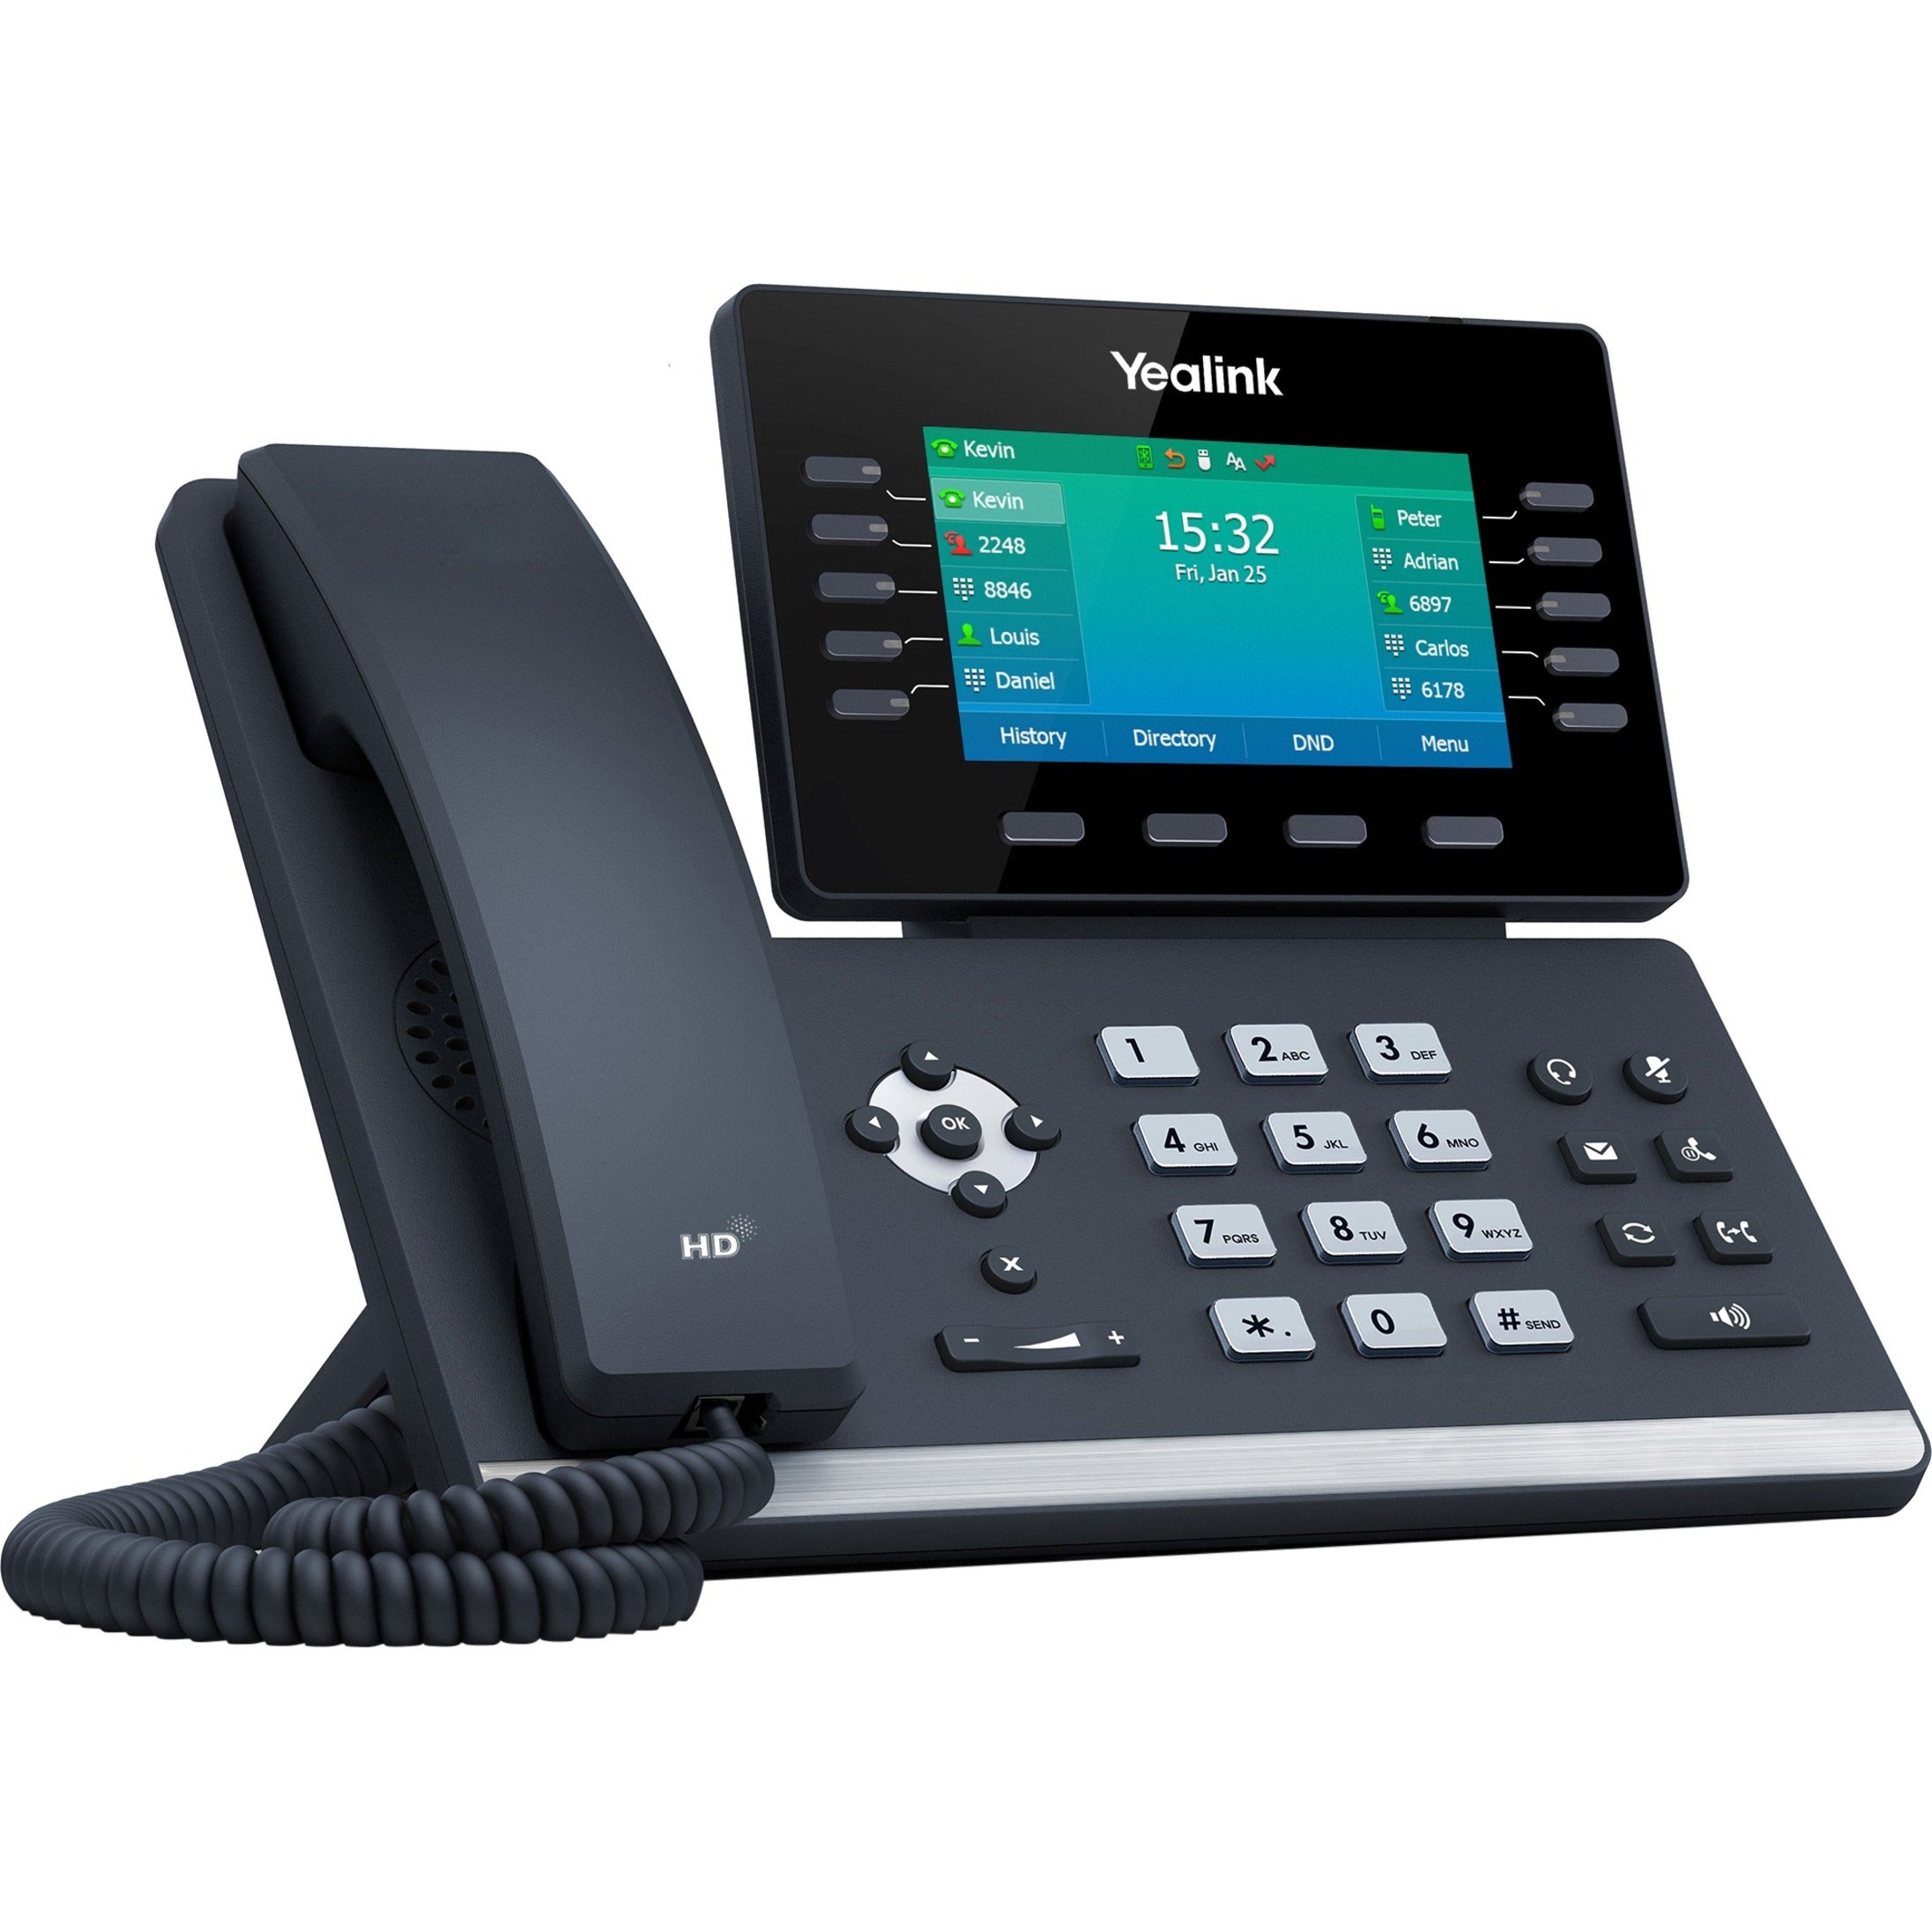 Yealink Prime Business Phone with 4.4in. color LCD Screen and built-in Bluetooth 4.2 (power supply not included) (SIP-T54W)